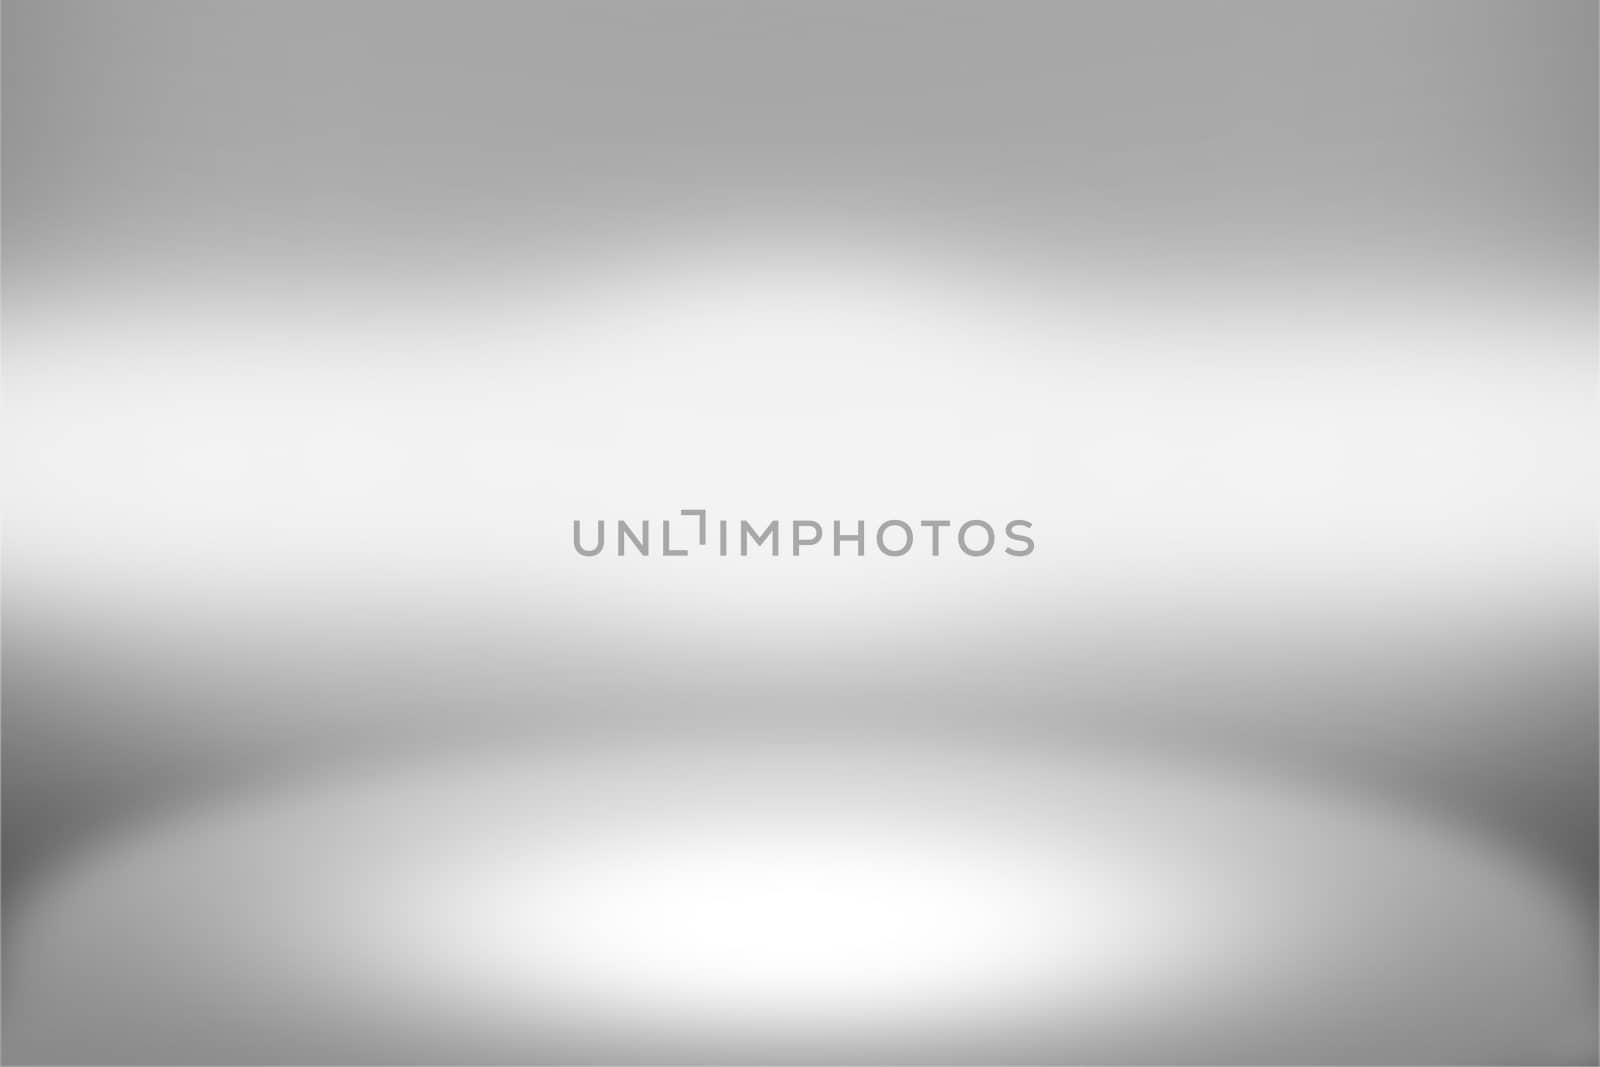 Product Showscase Spotlight Background - White, Clear, Round Photographer Studio by Loud-Mango